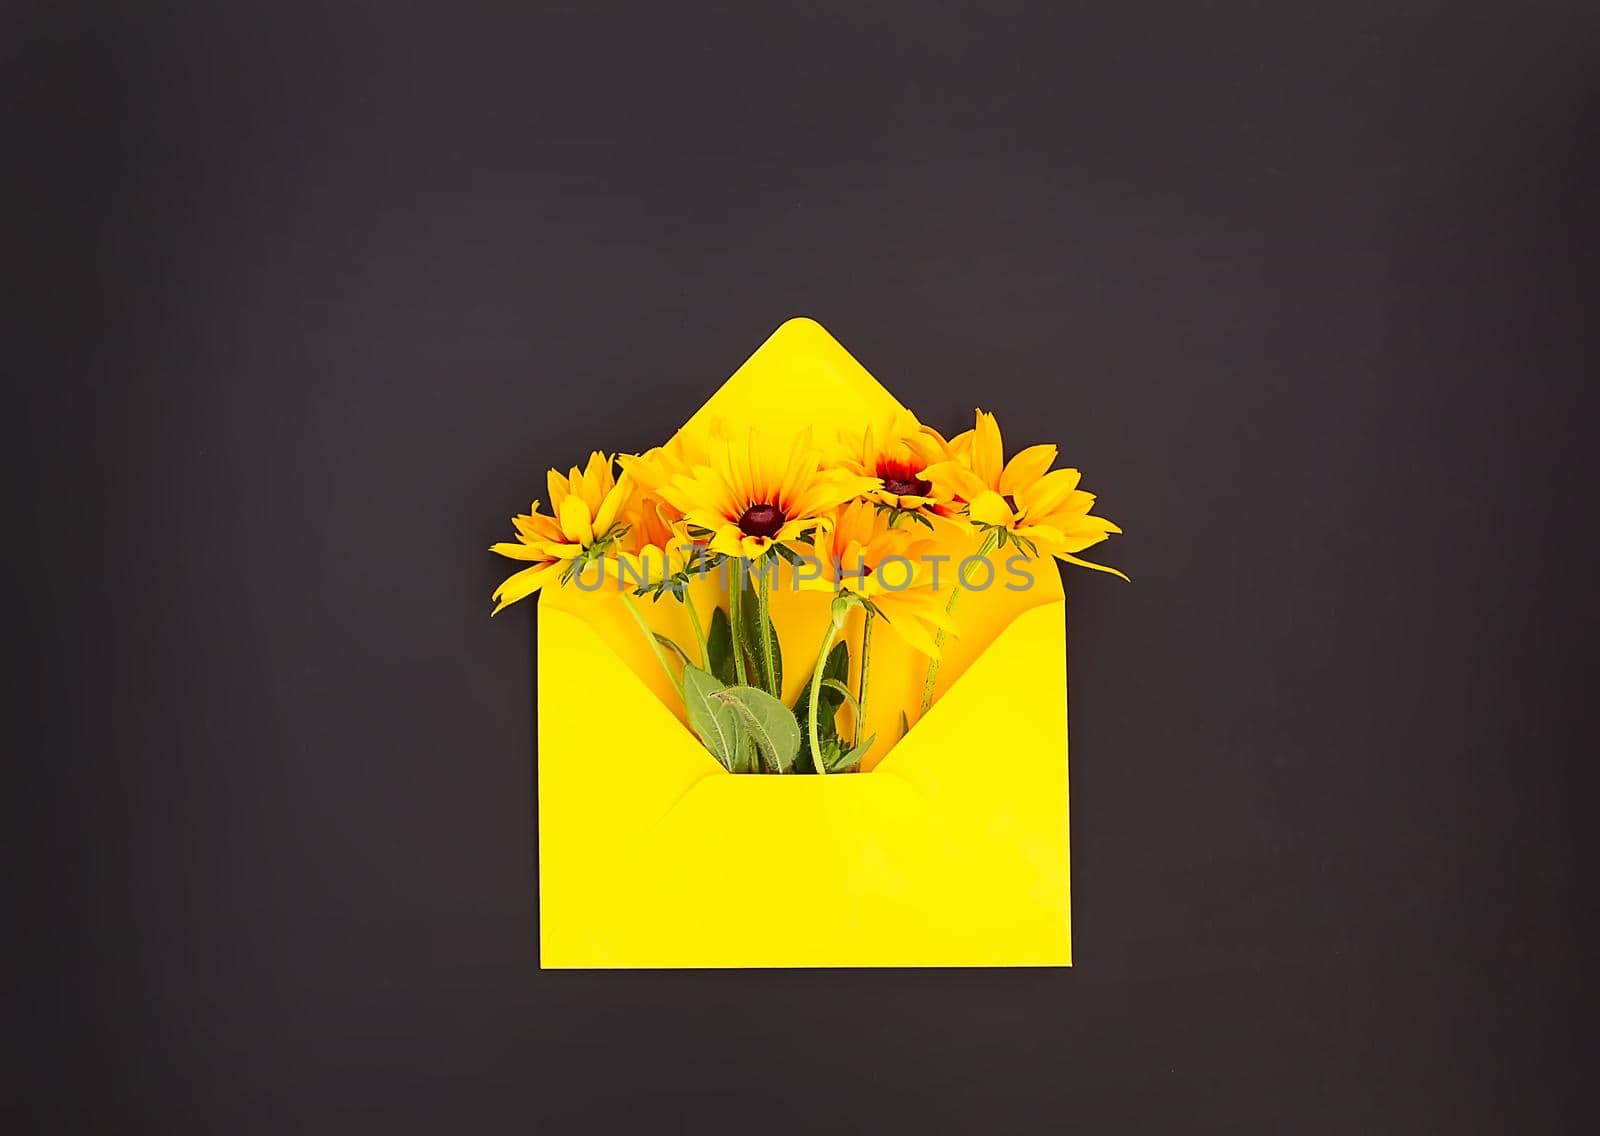 Yellow paper envelope with rudbeckia or black-eyed susan garden flowers on dark background. Festive floral template. Greeting card design. Top view.